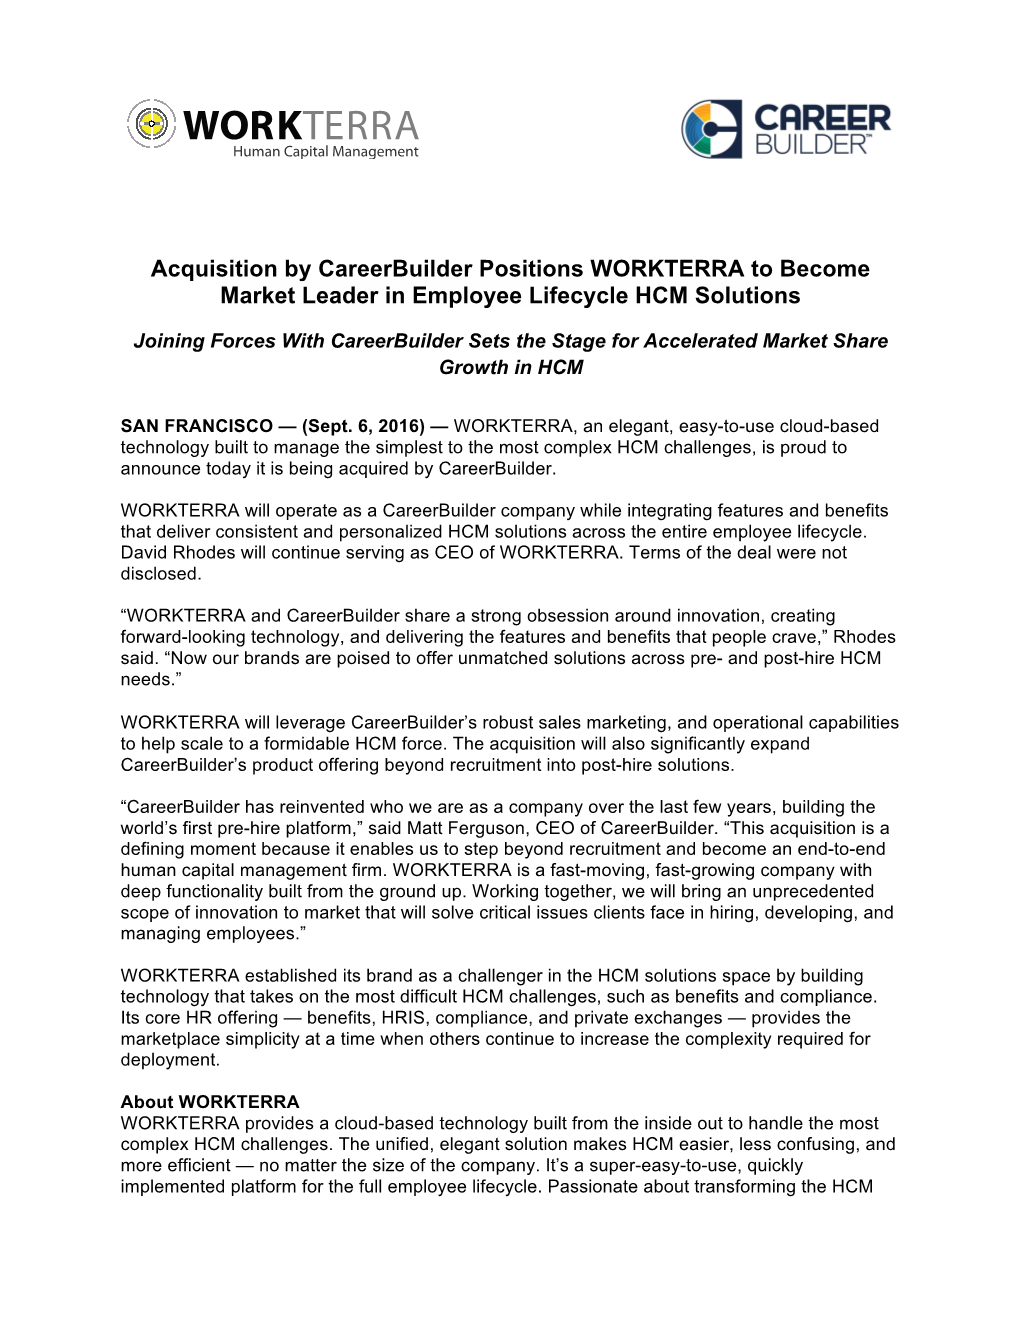 Acquisition by Careerbuilder Positions WORKTERRA to Become Market Leader in Employee Lifecycle HCM Solutions